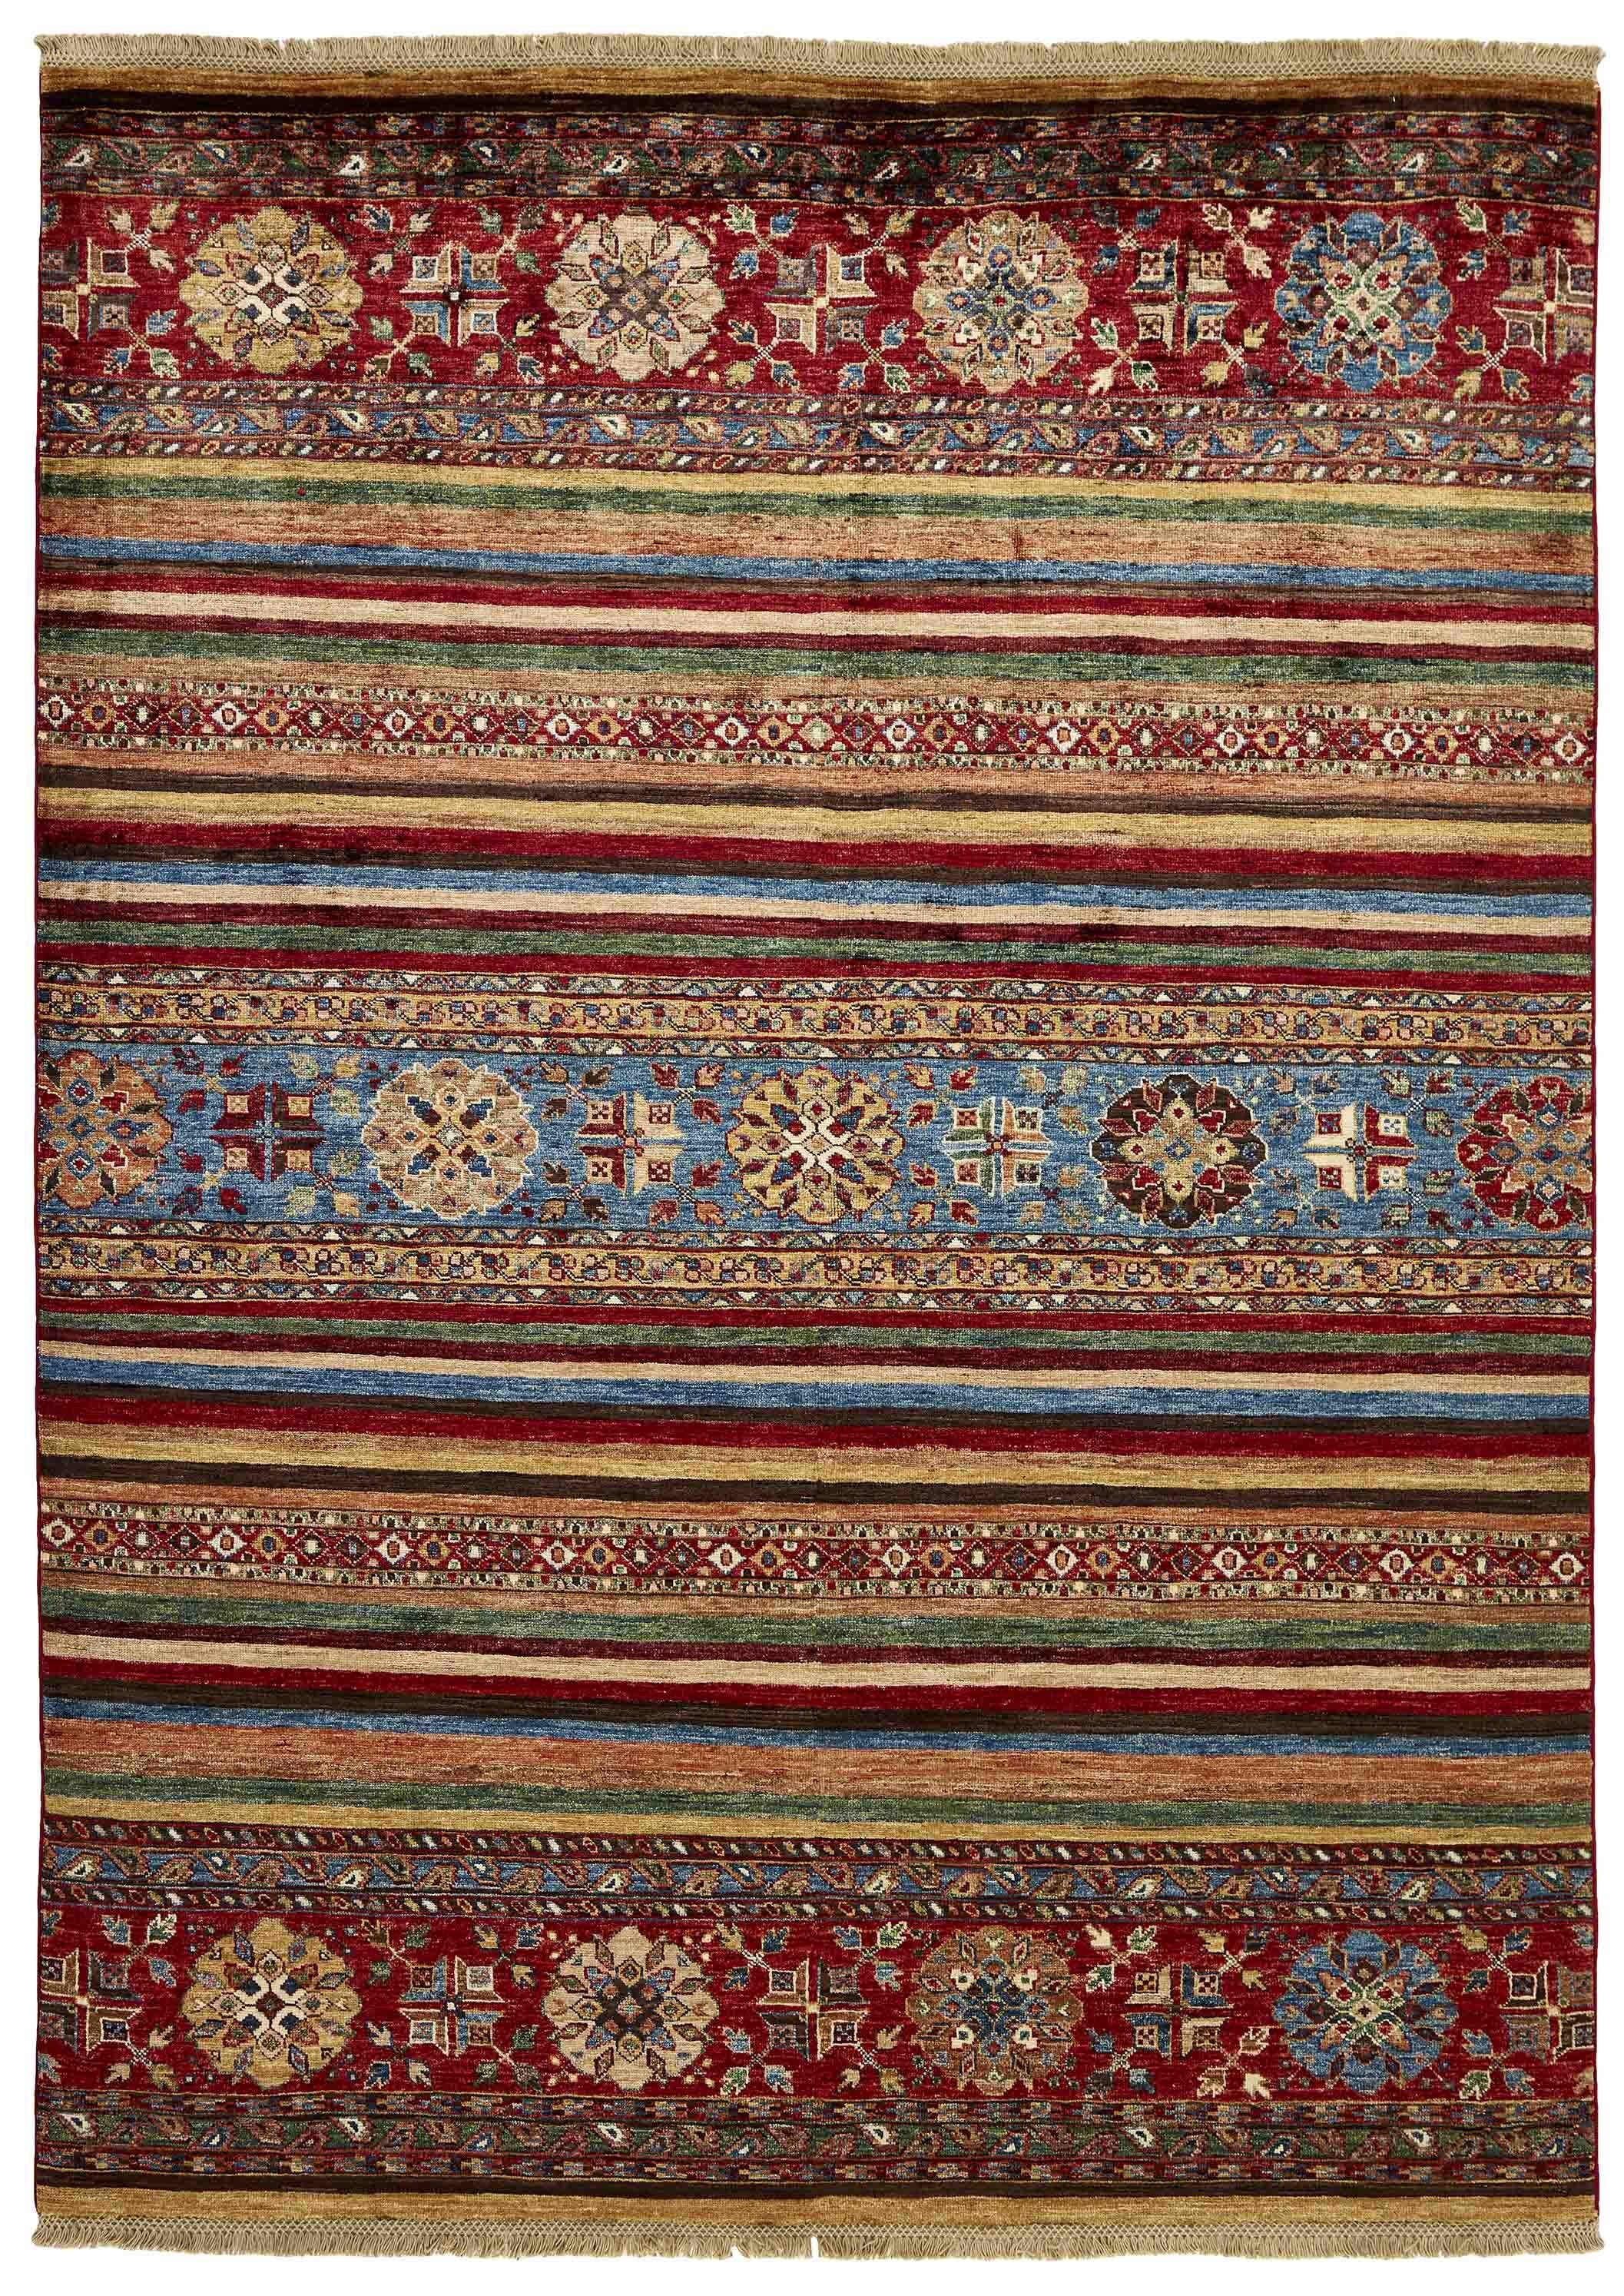 Authentic oriental rug with traditional tile pattern in red, pink, orange, yellow, blue, green, beige and brown